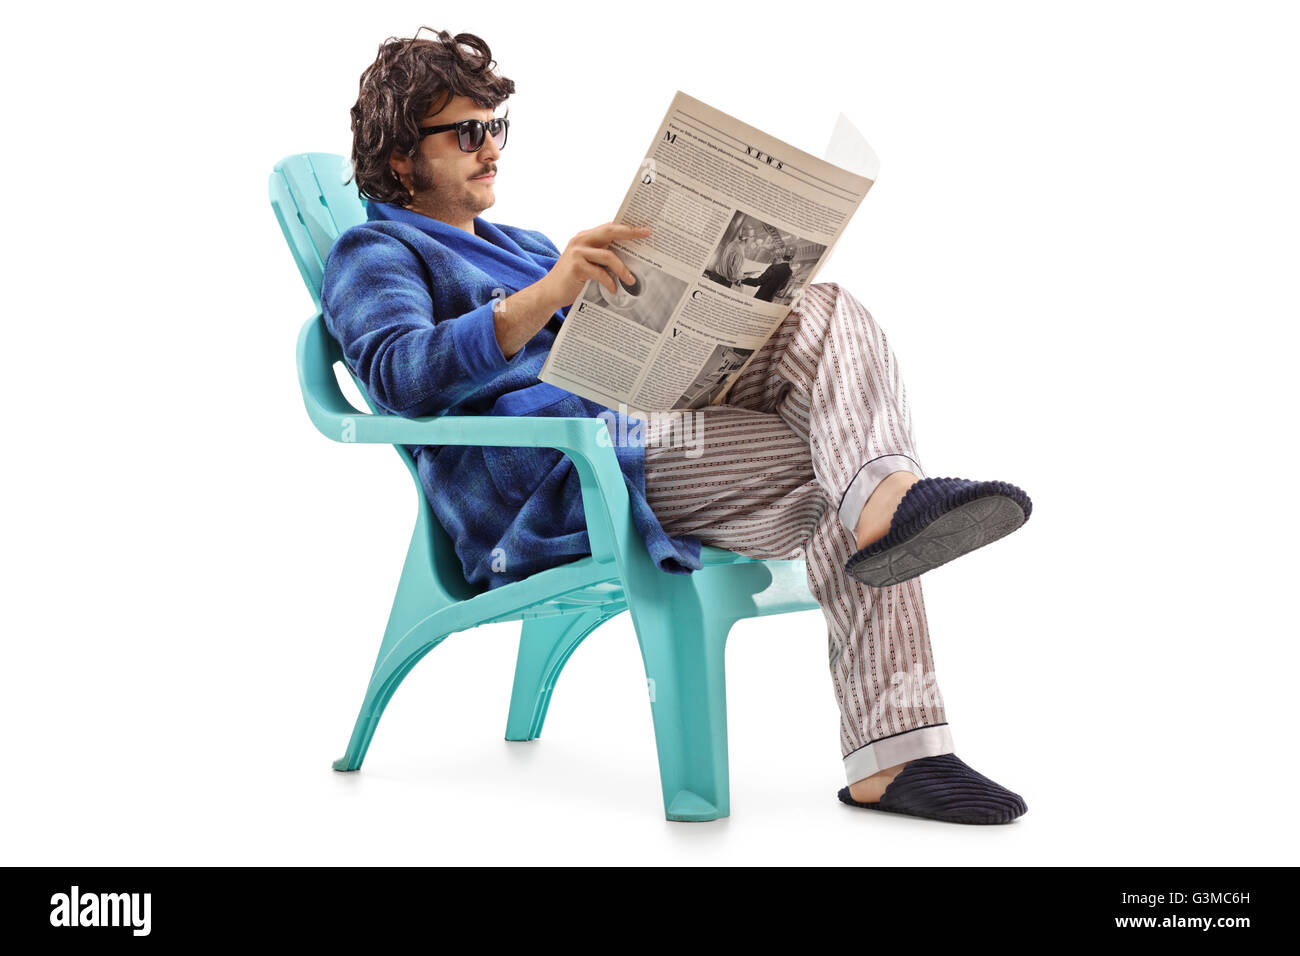 Young man reading a newspaper seated on a blue plastic chair isolated on white background Stock Photo